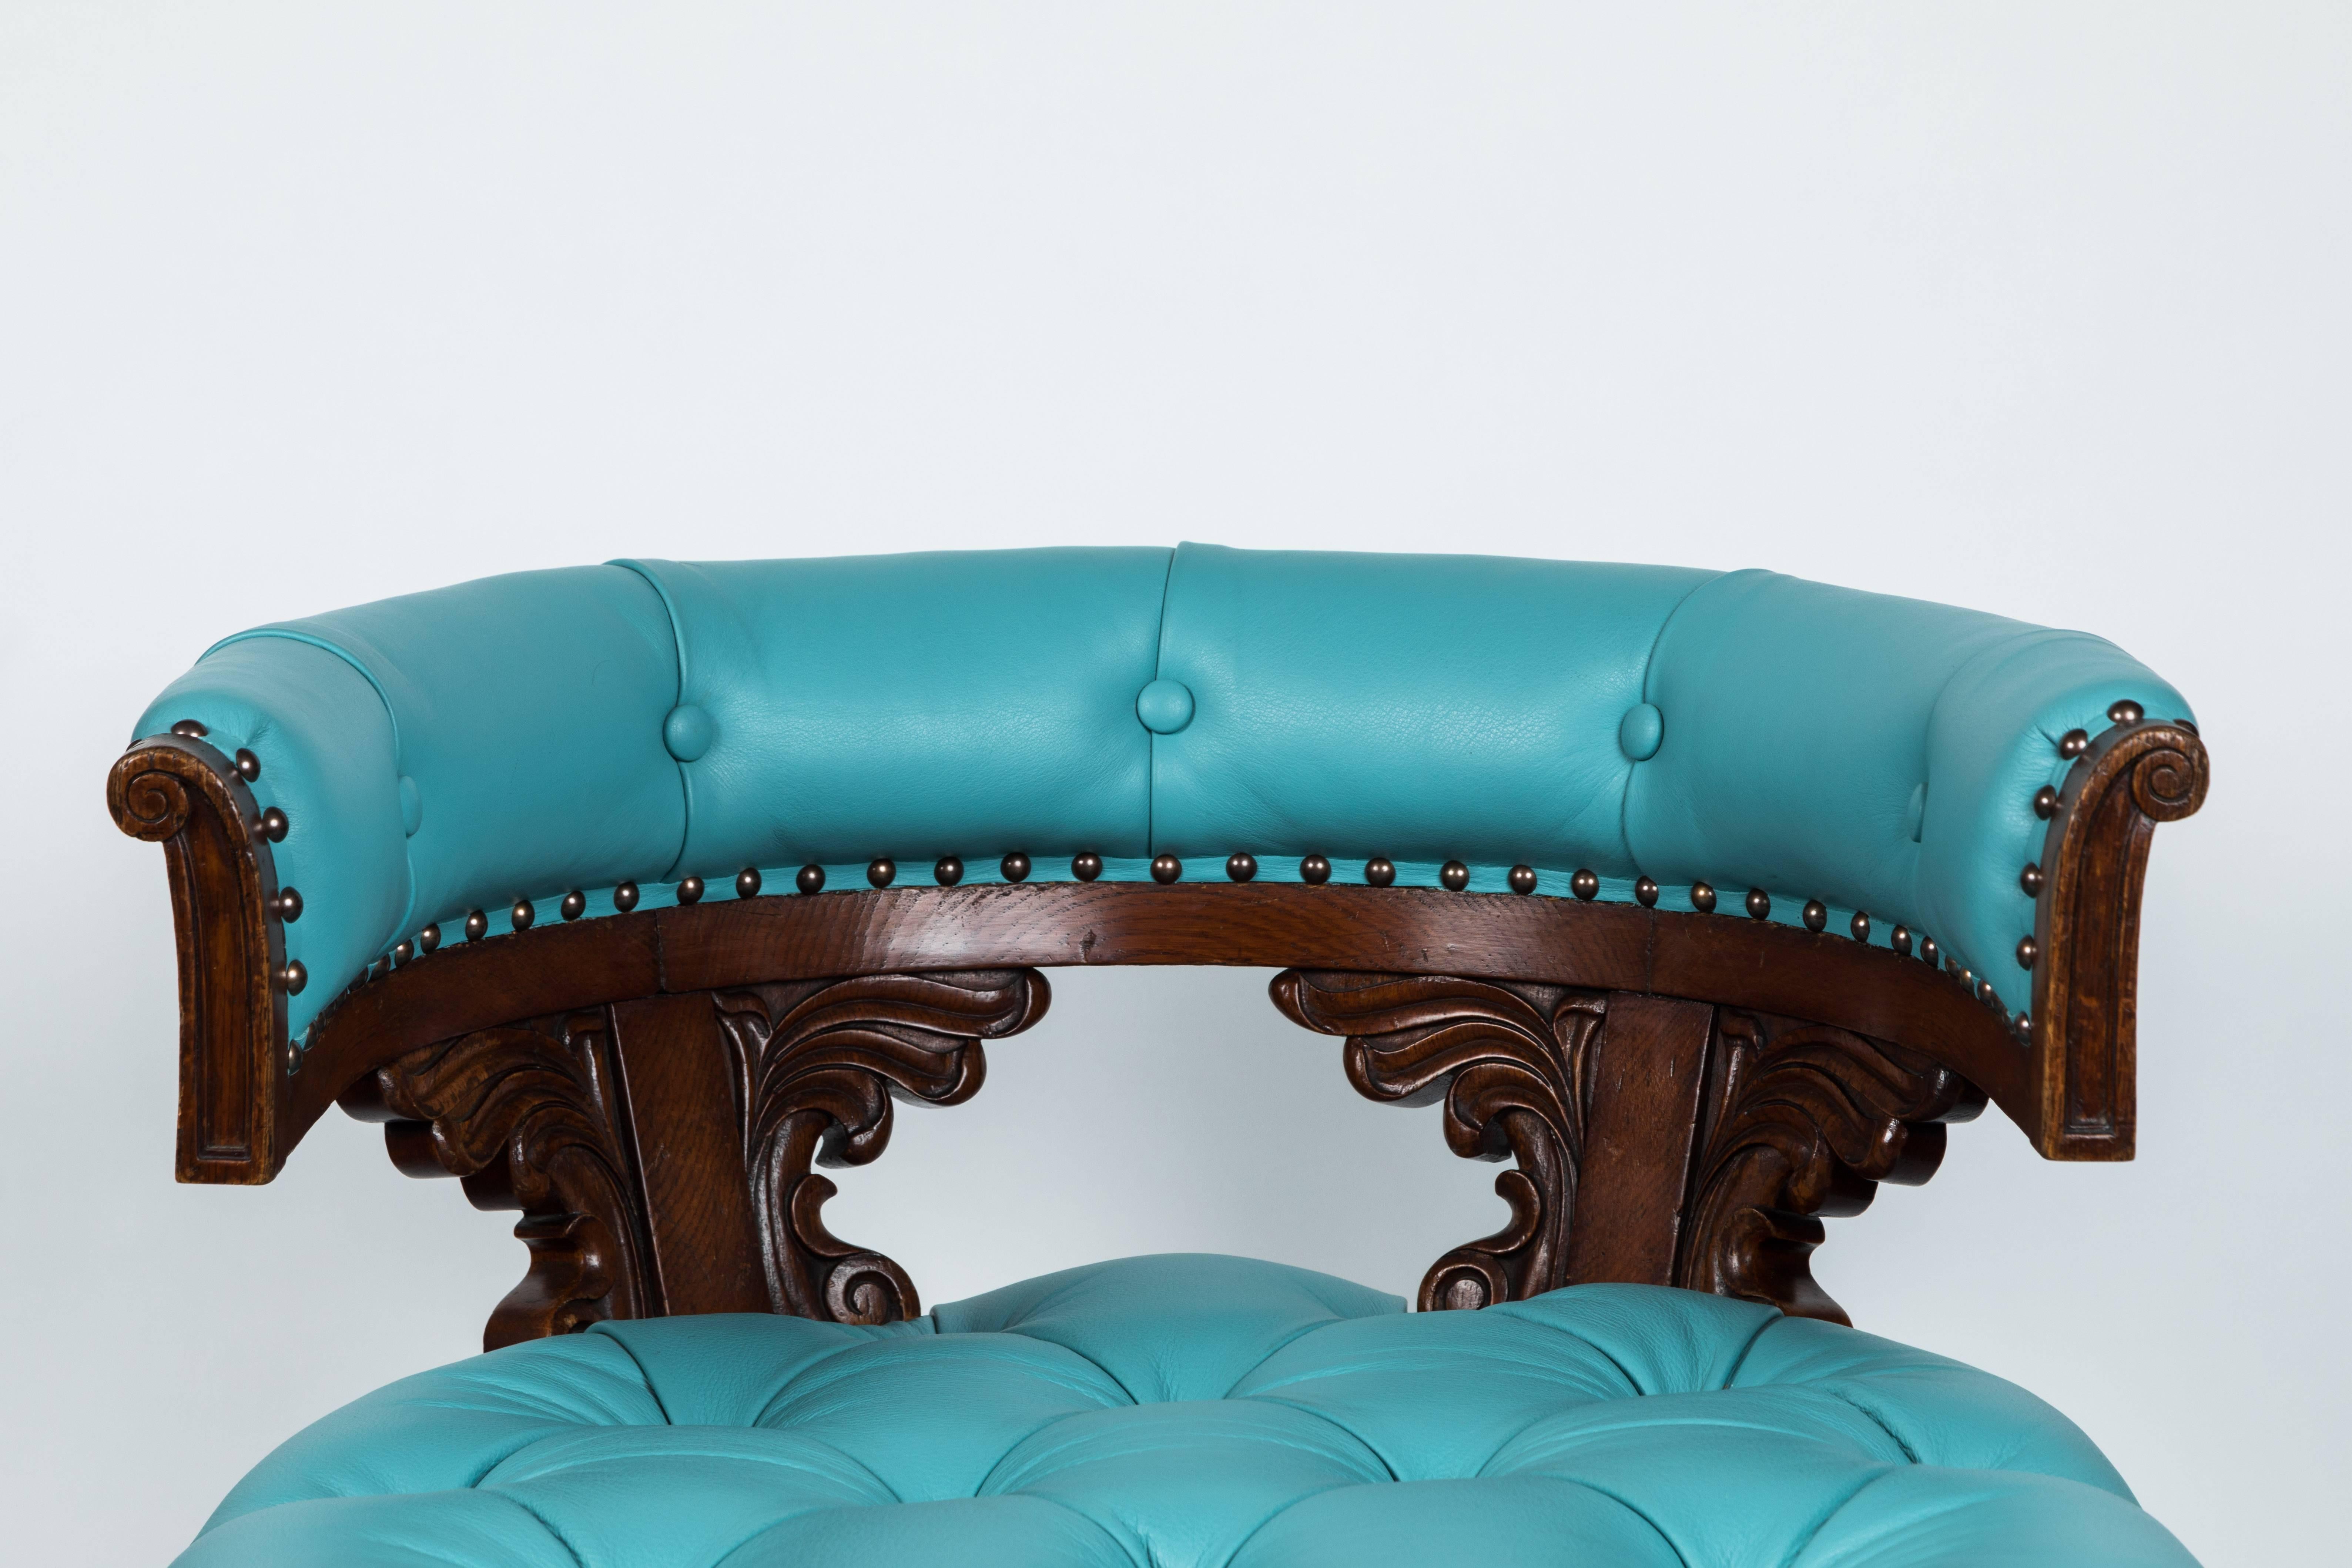 Antique William IV Klismos-style chair in mahogany, English, circa 1830, restored and newly re-upholstered in turquoise leather.